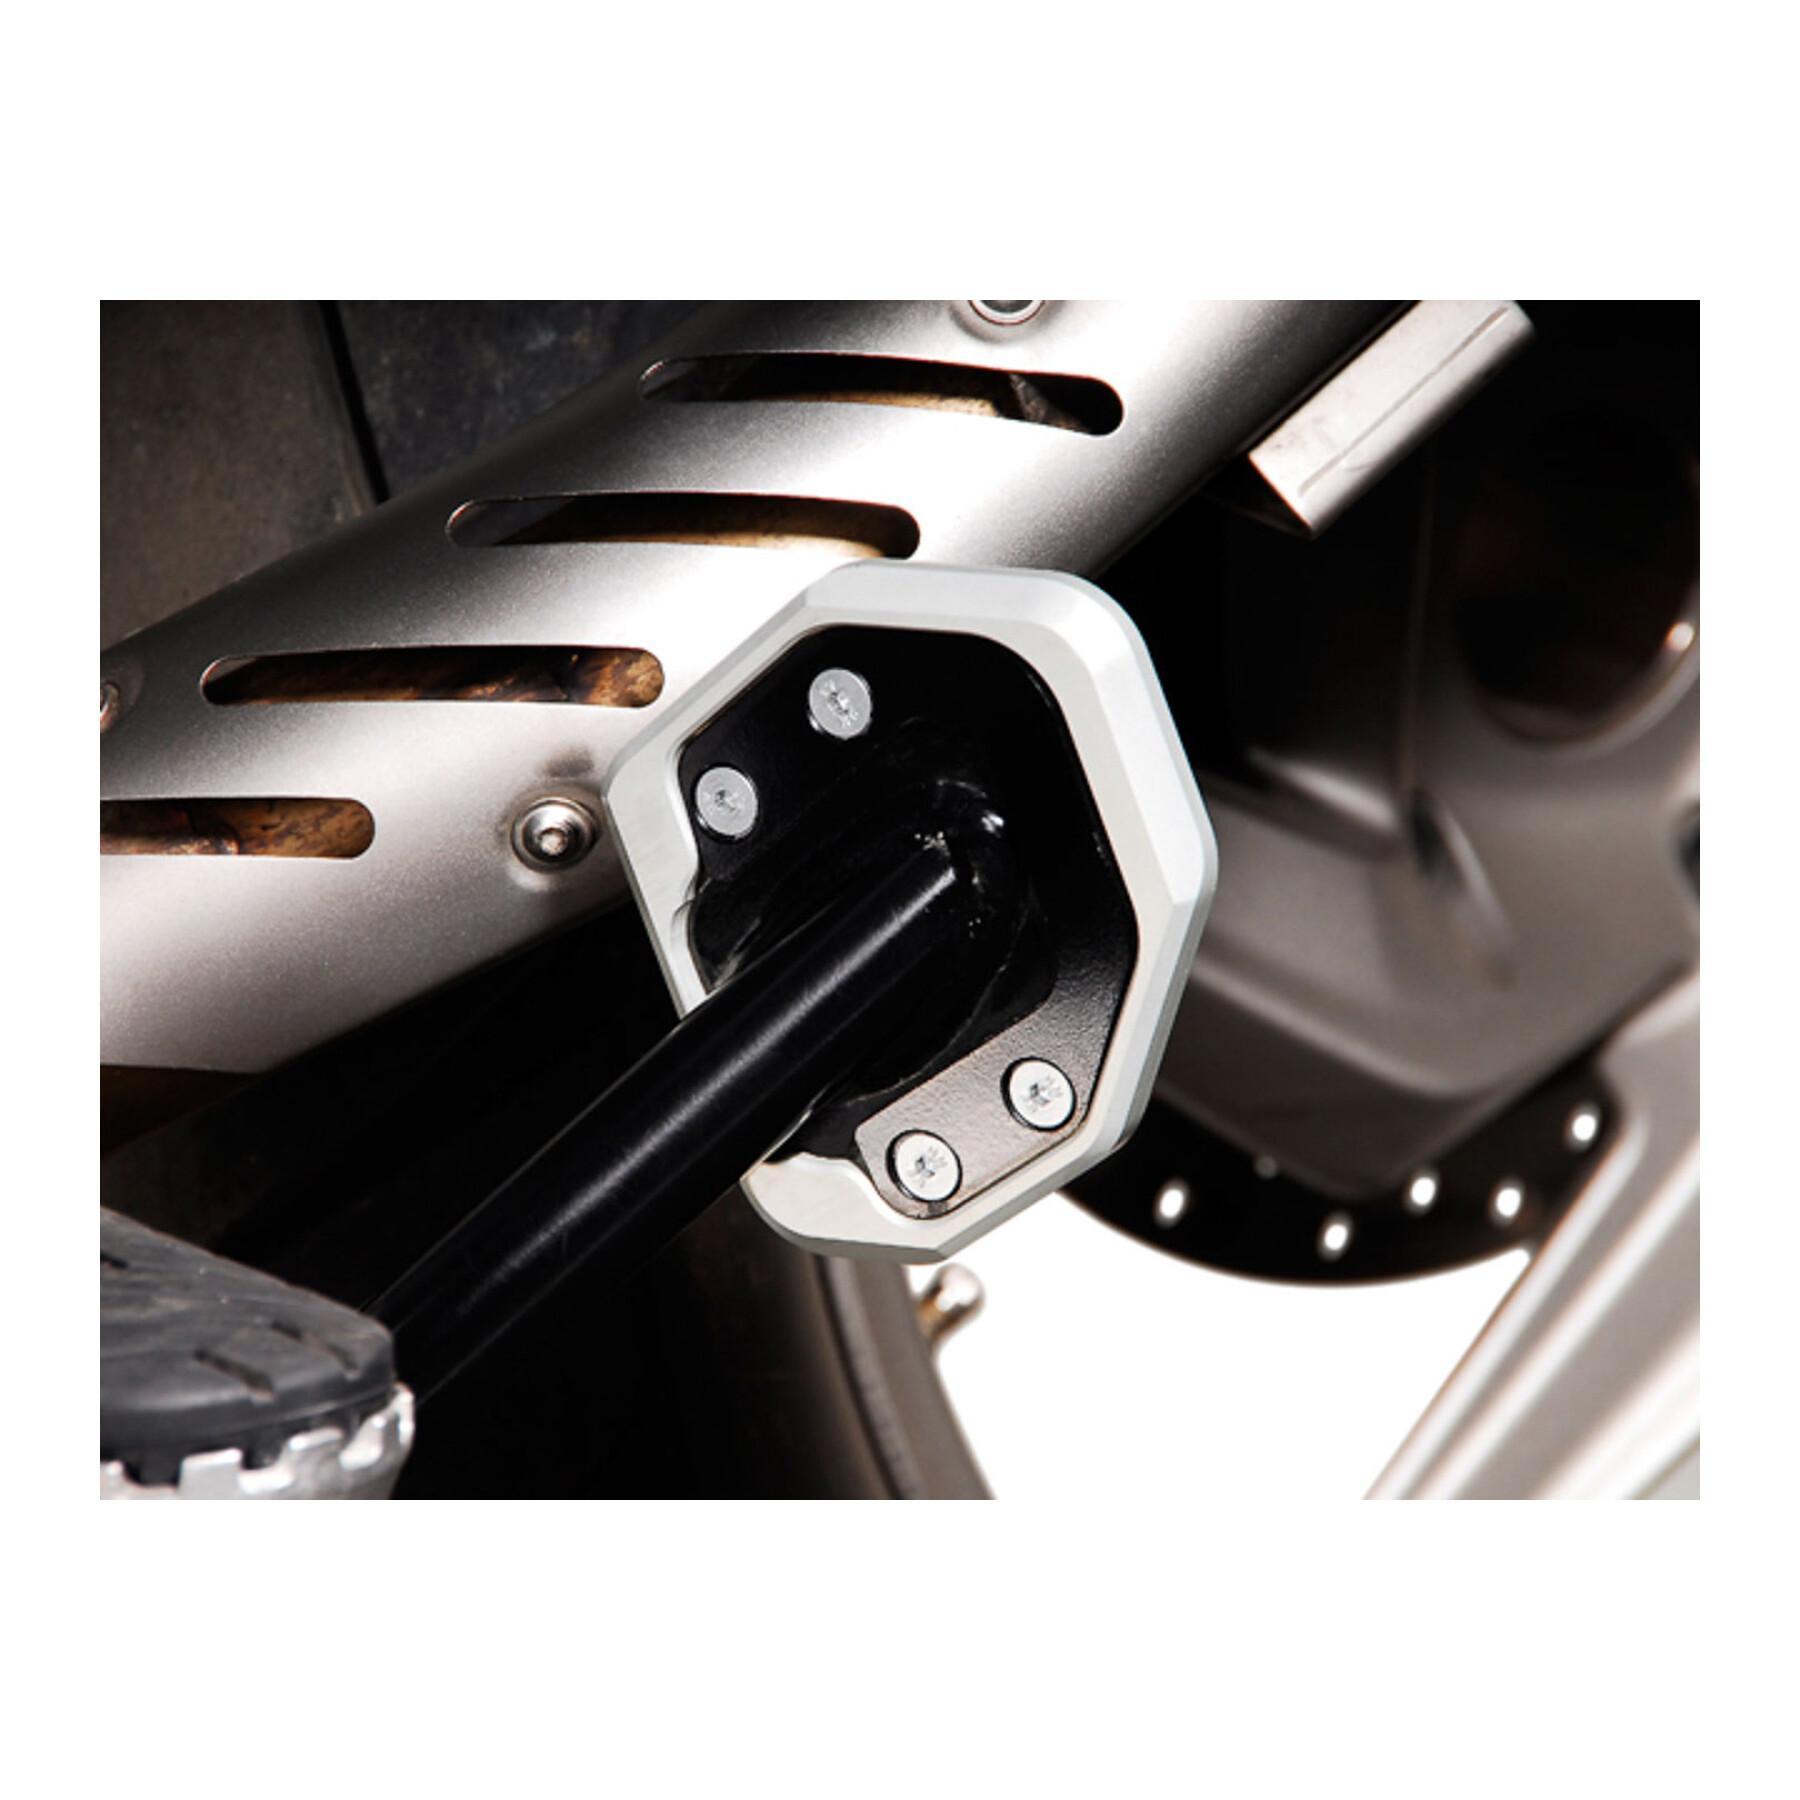 Motorcycle side stand extension SW-Motech Bmw R1200GS / R1200GS Adventure.